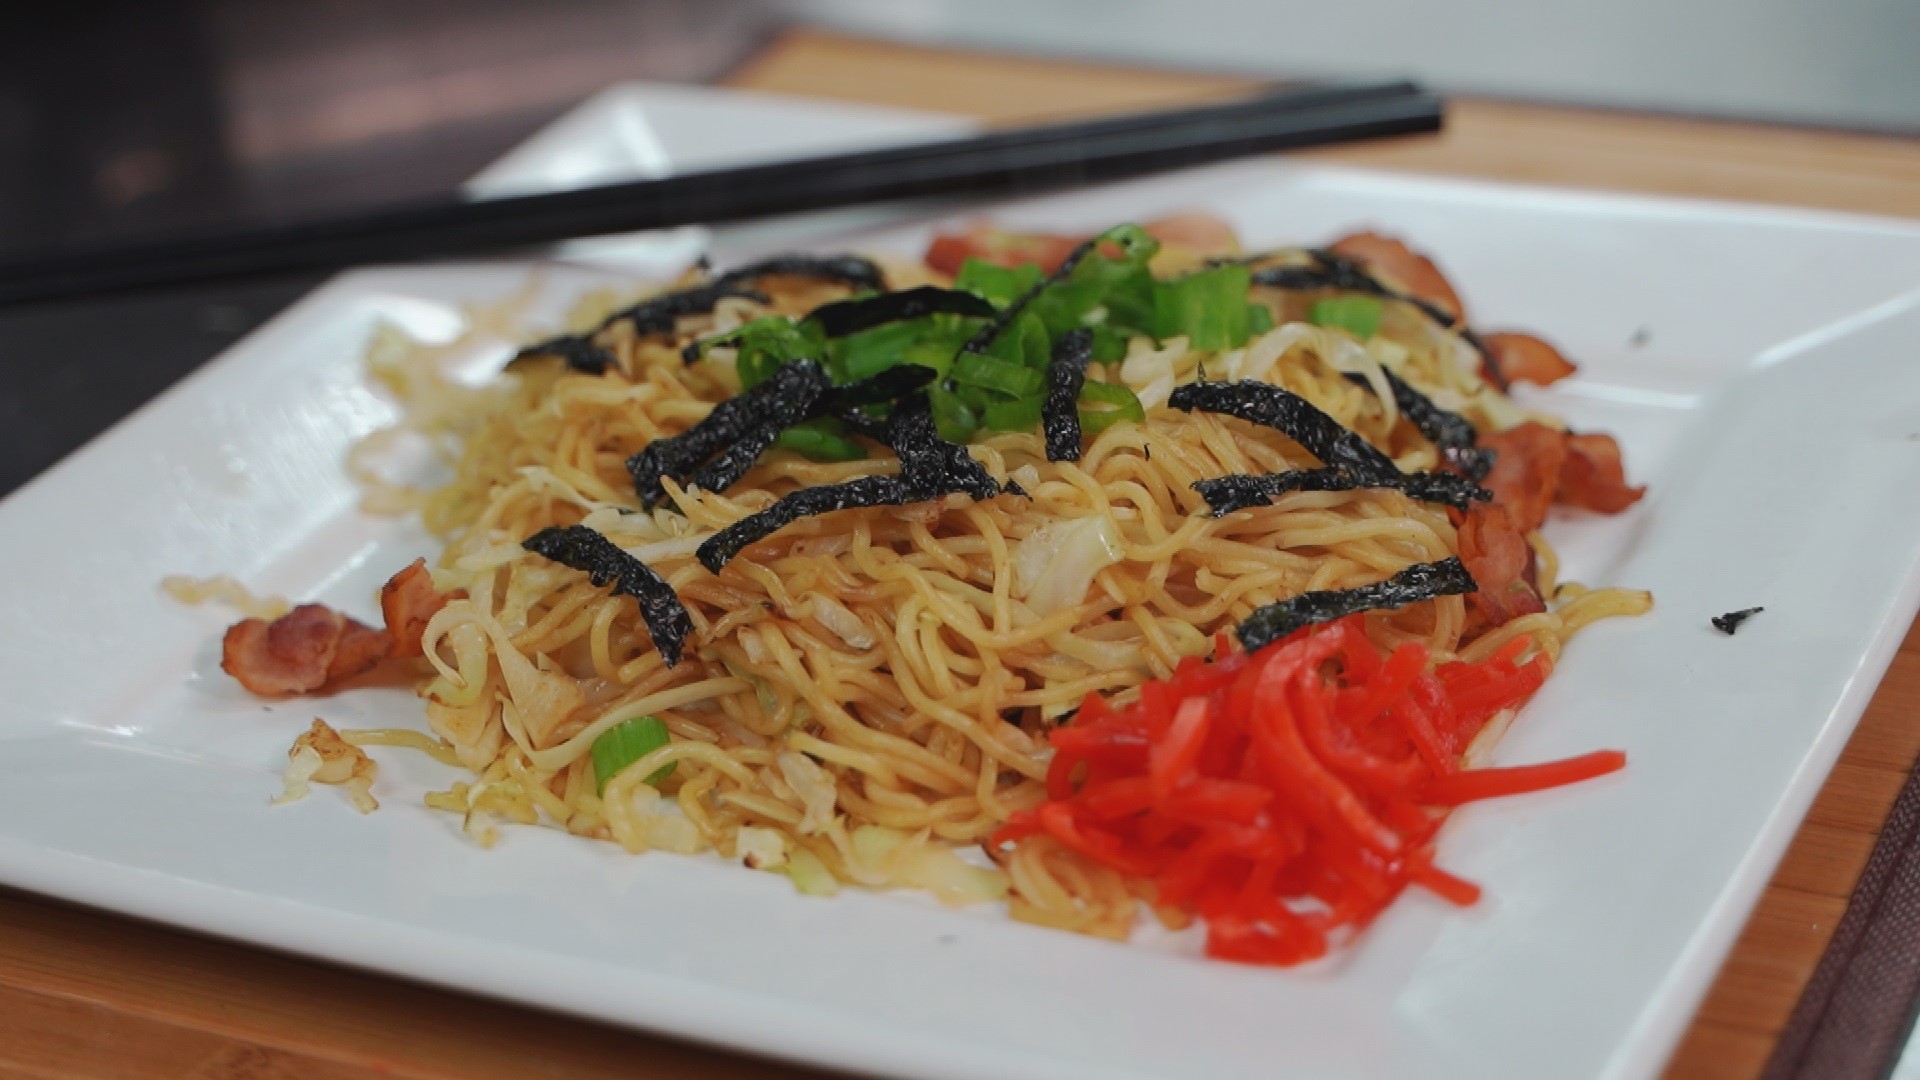 Julia and Jalea learned to make yakisoba, or fried noodles, with Mori Willhite of Katsumi's Kitchen.